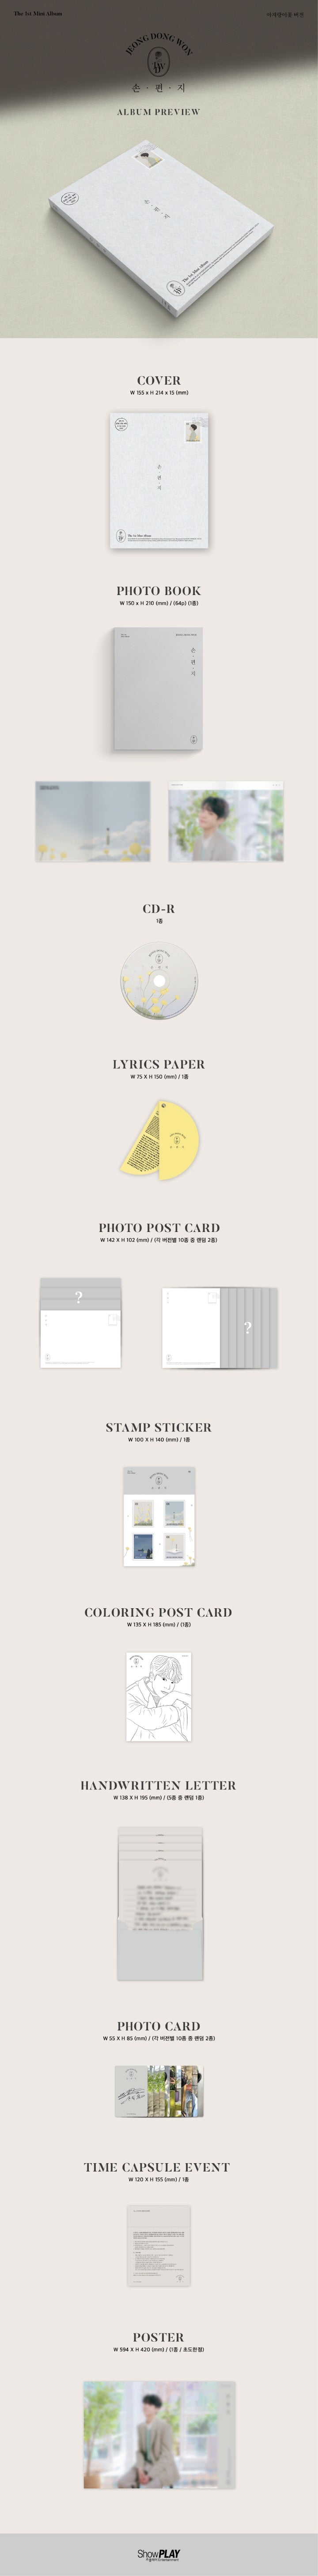 1 CD
1 Photo Book (64 pages)
1 Lyrics Paper
2 Photo Post Cards (random out of 10 types)
1 Stamp Sticker
1 Coloring Post Ca...